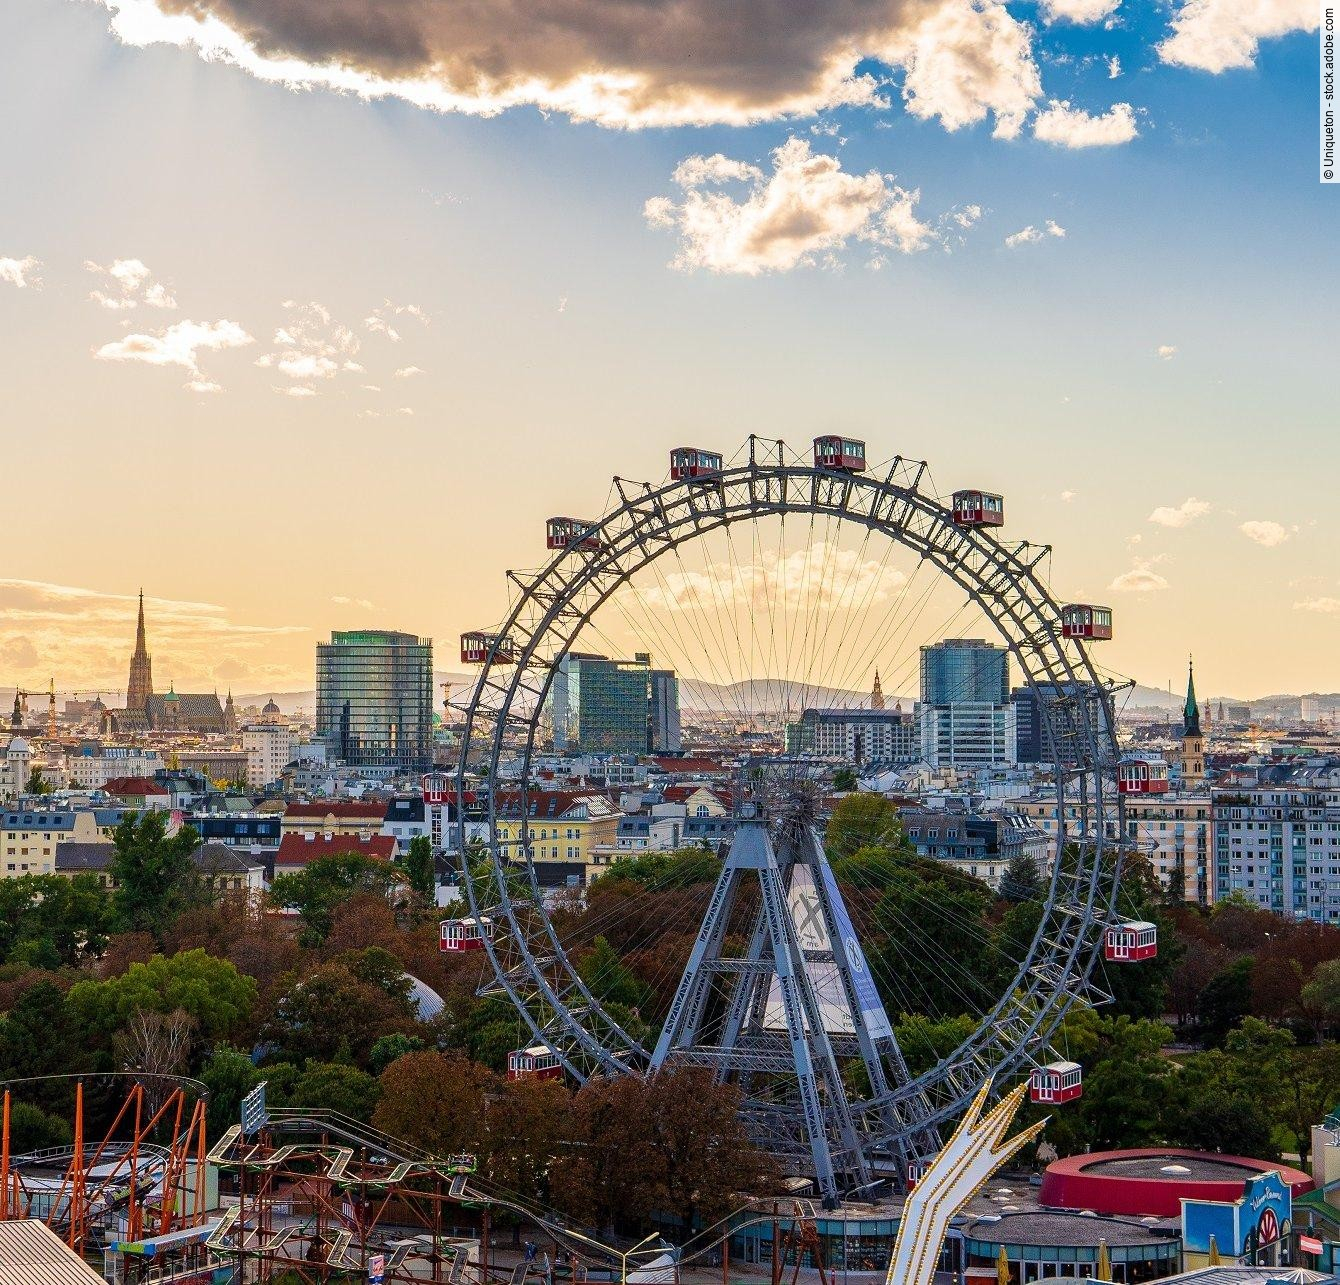 City view of Vienna, Austria, from above at Prater amusement par